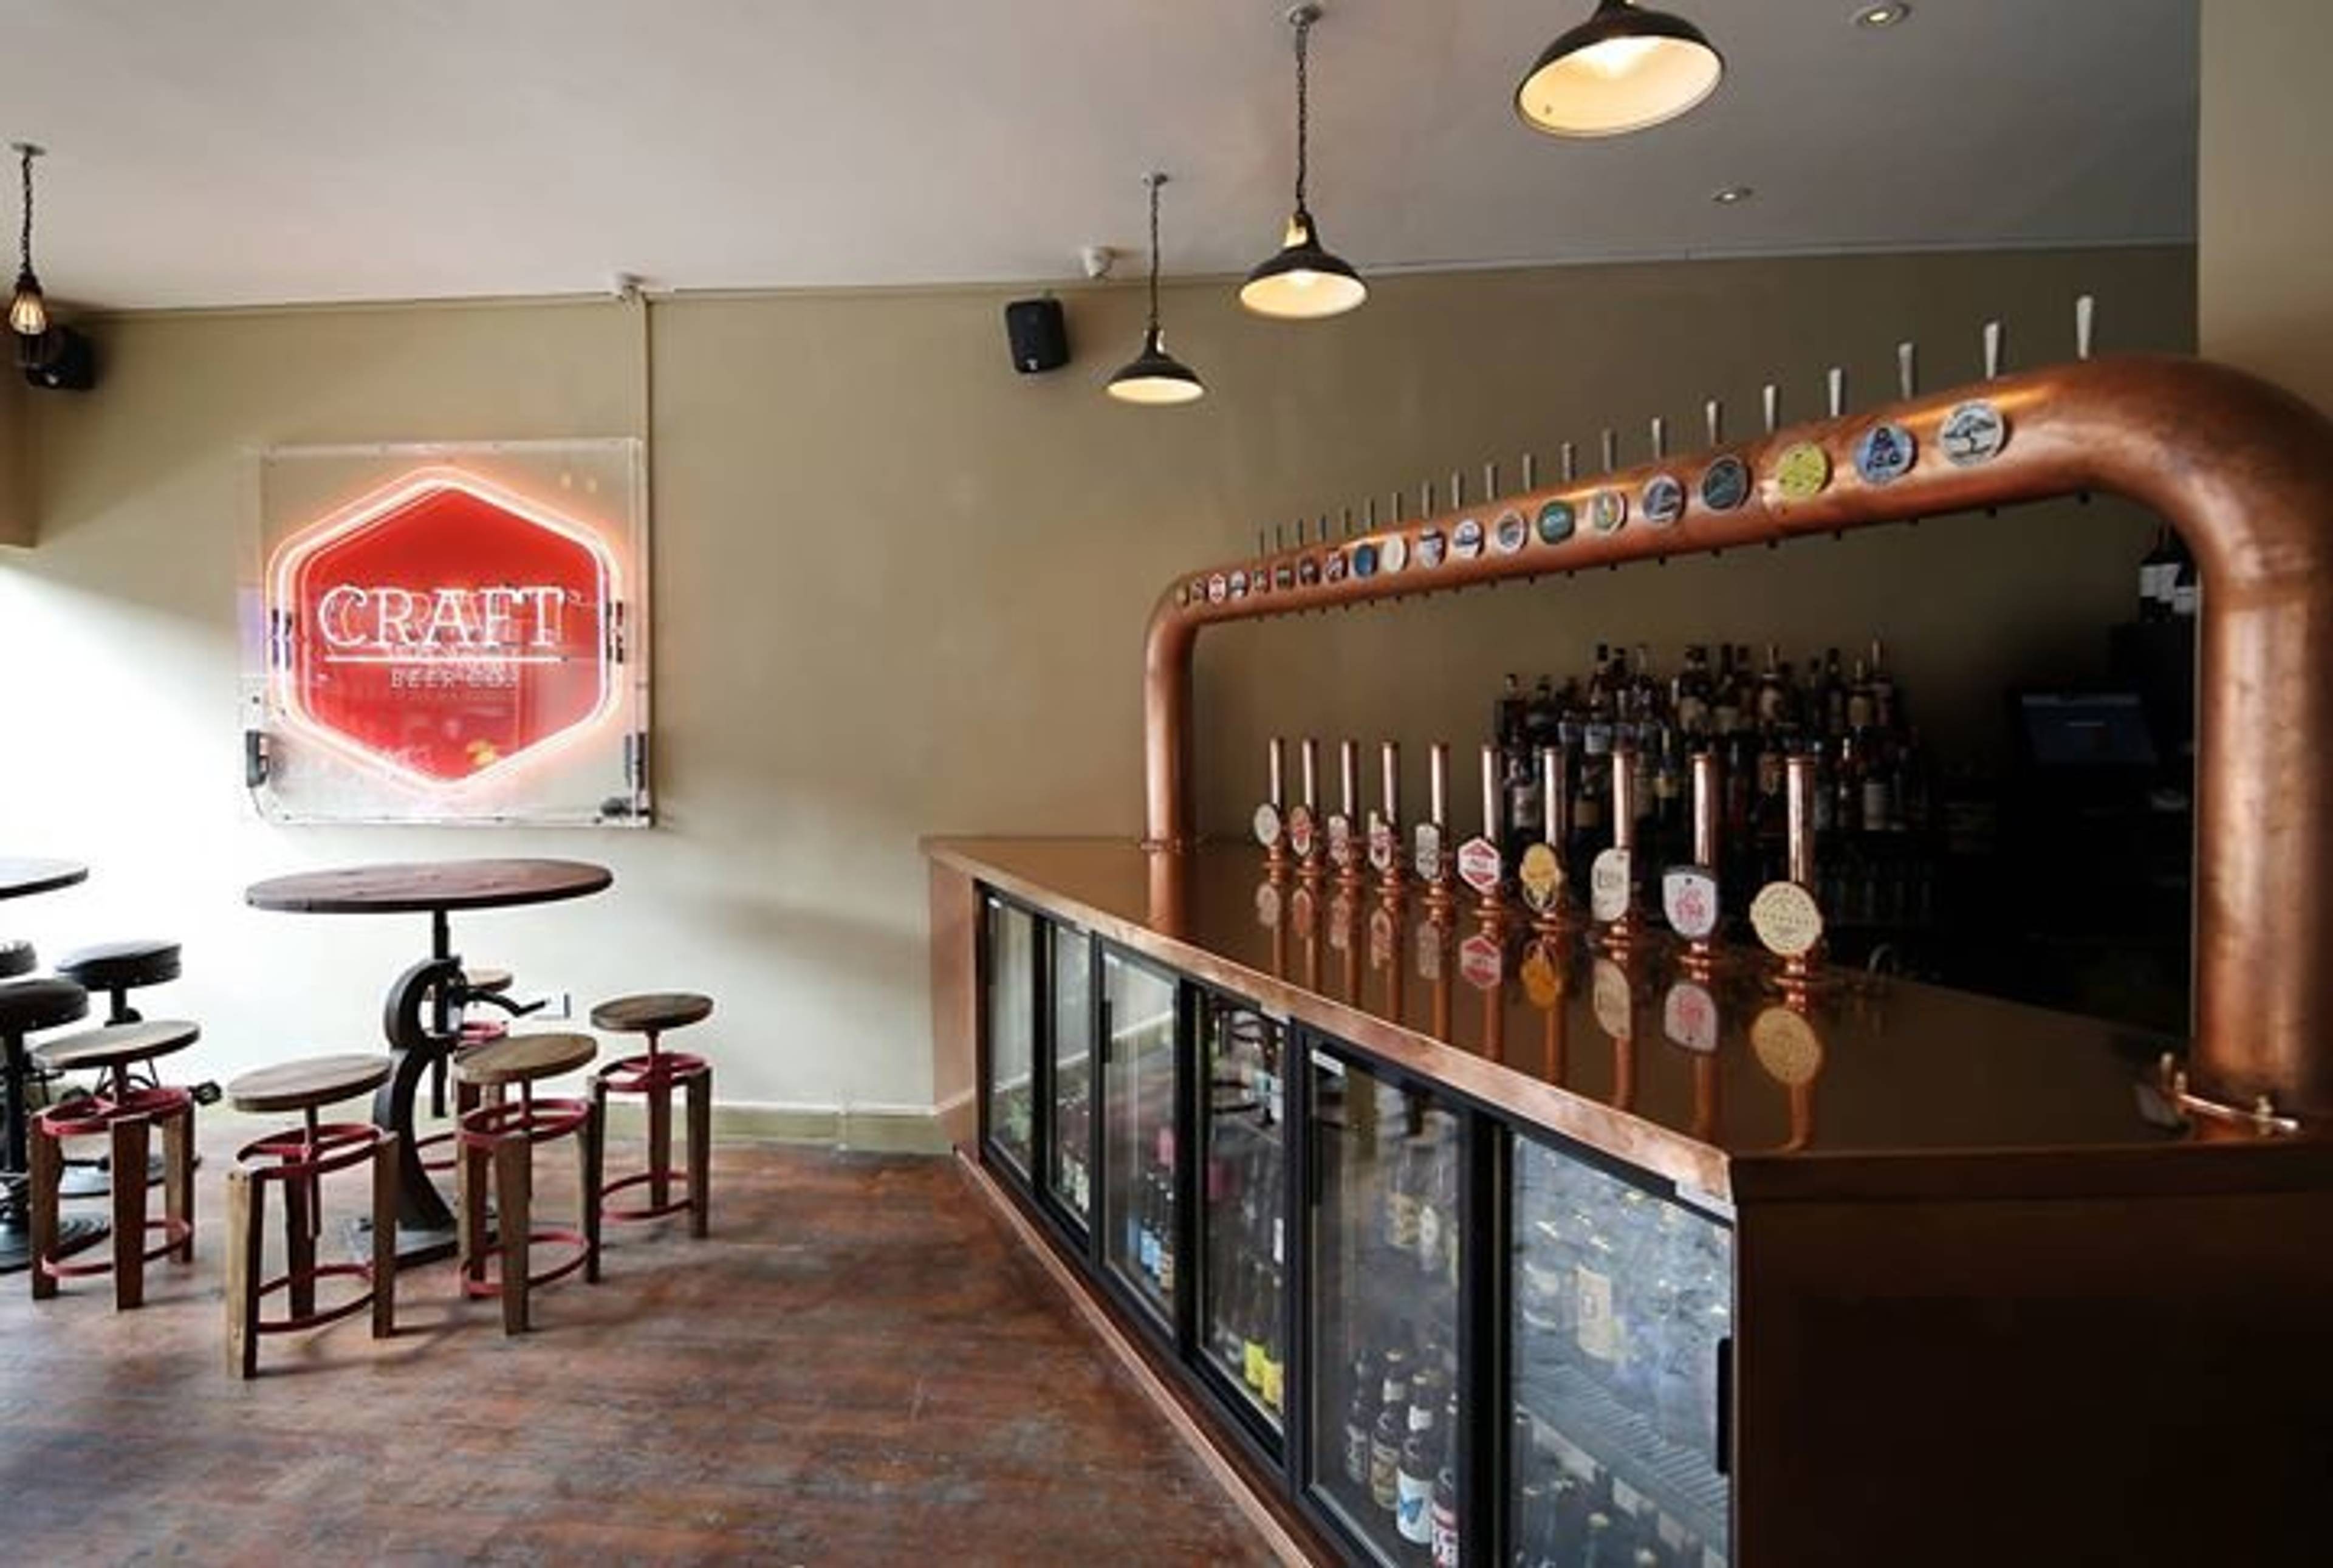 The Craft Beer Co. Brixton